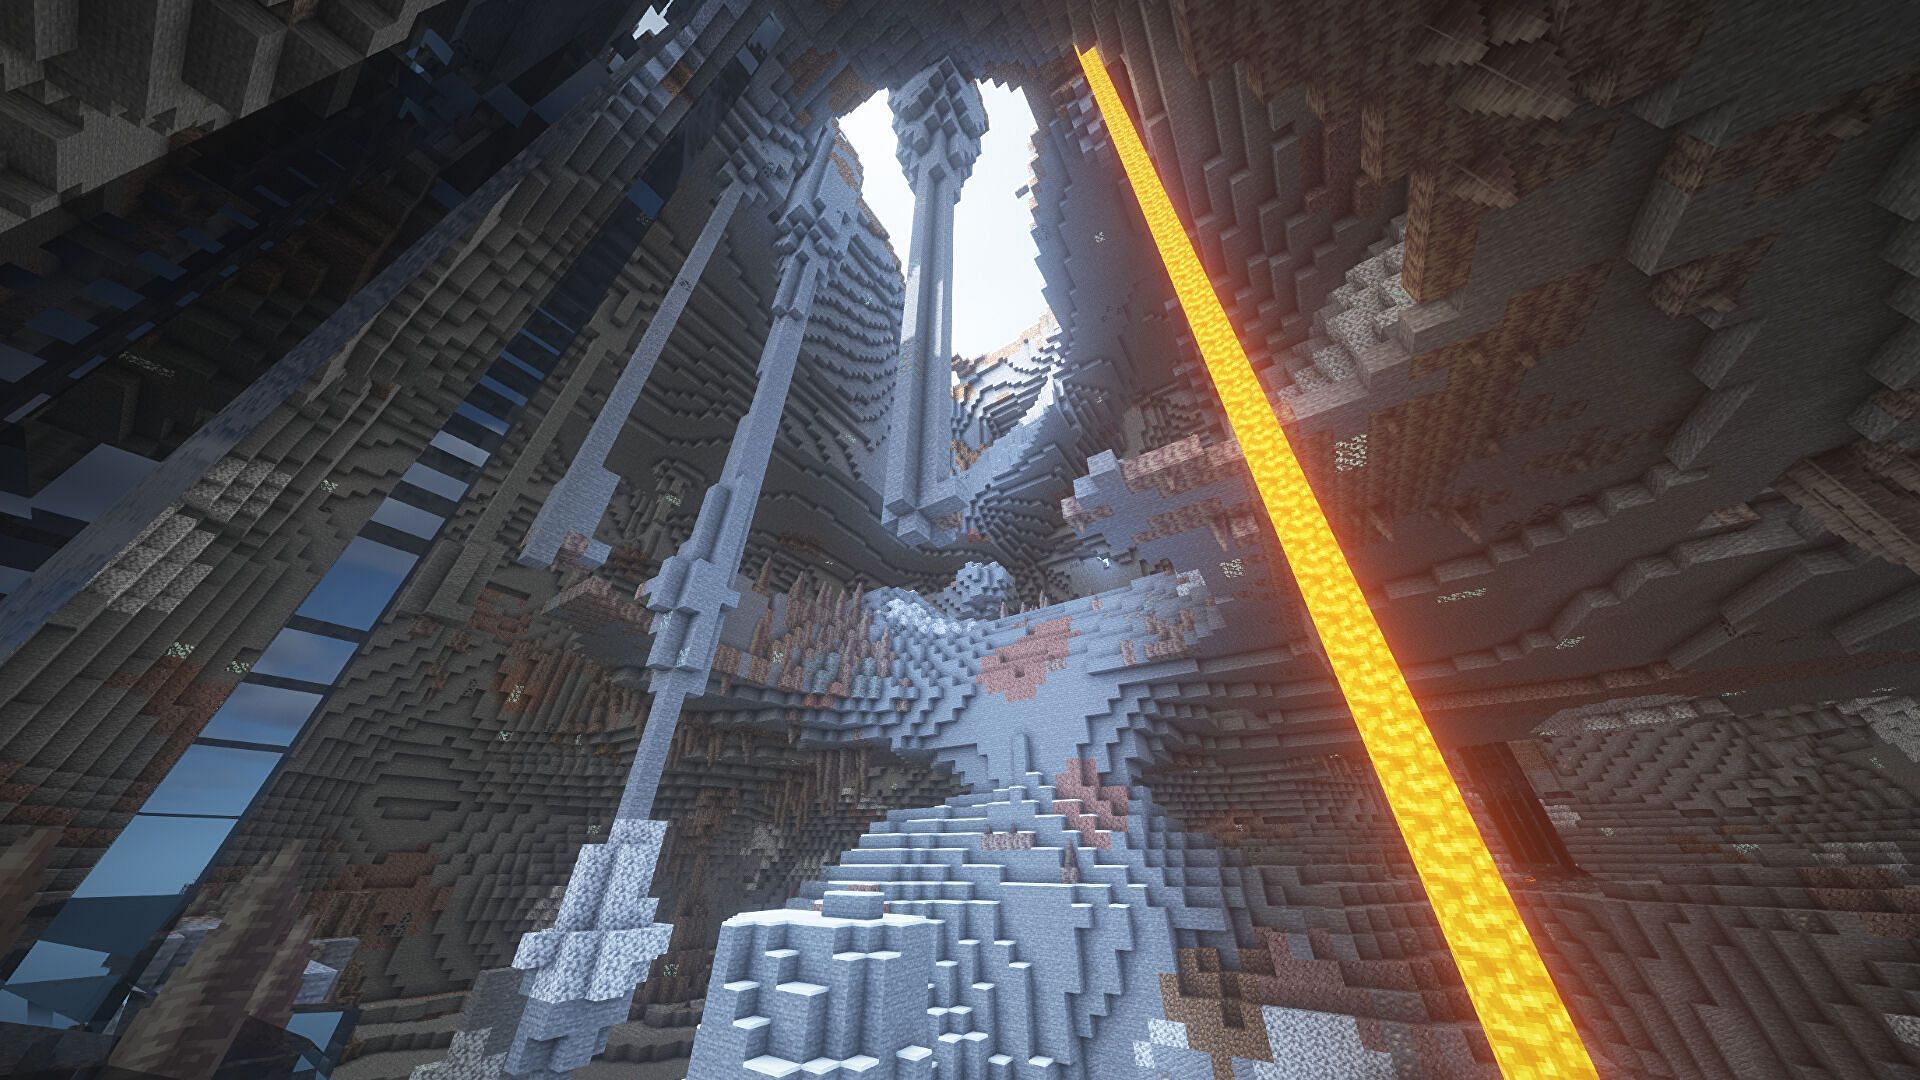 Battle inside a spawn cave courtesy of this seed (Image via Mojang)